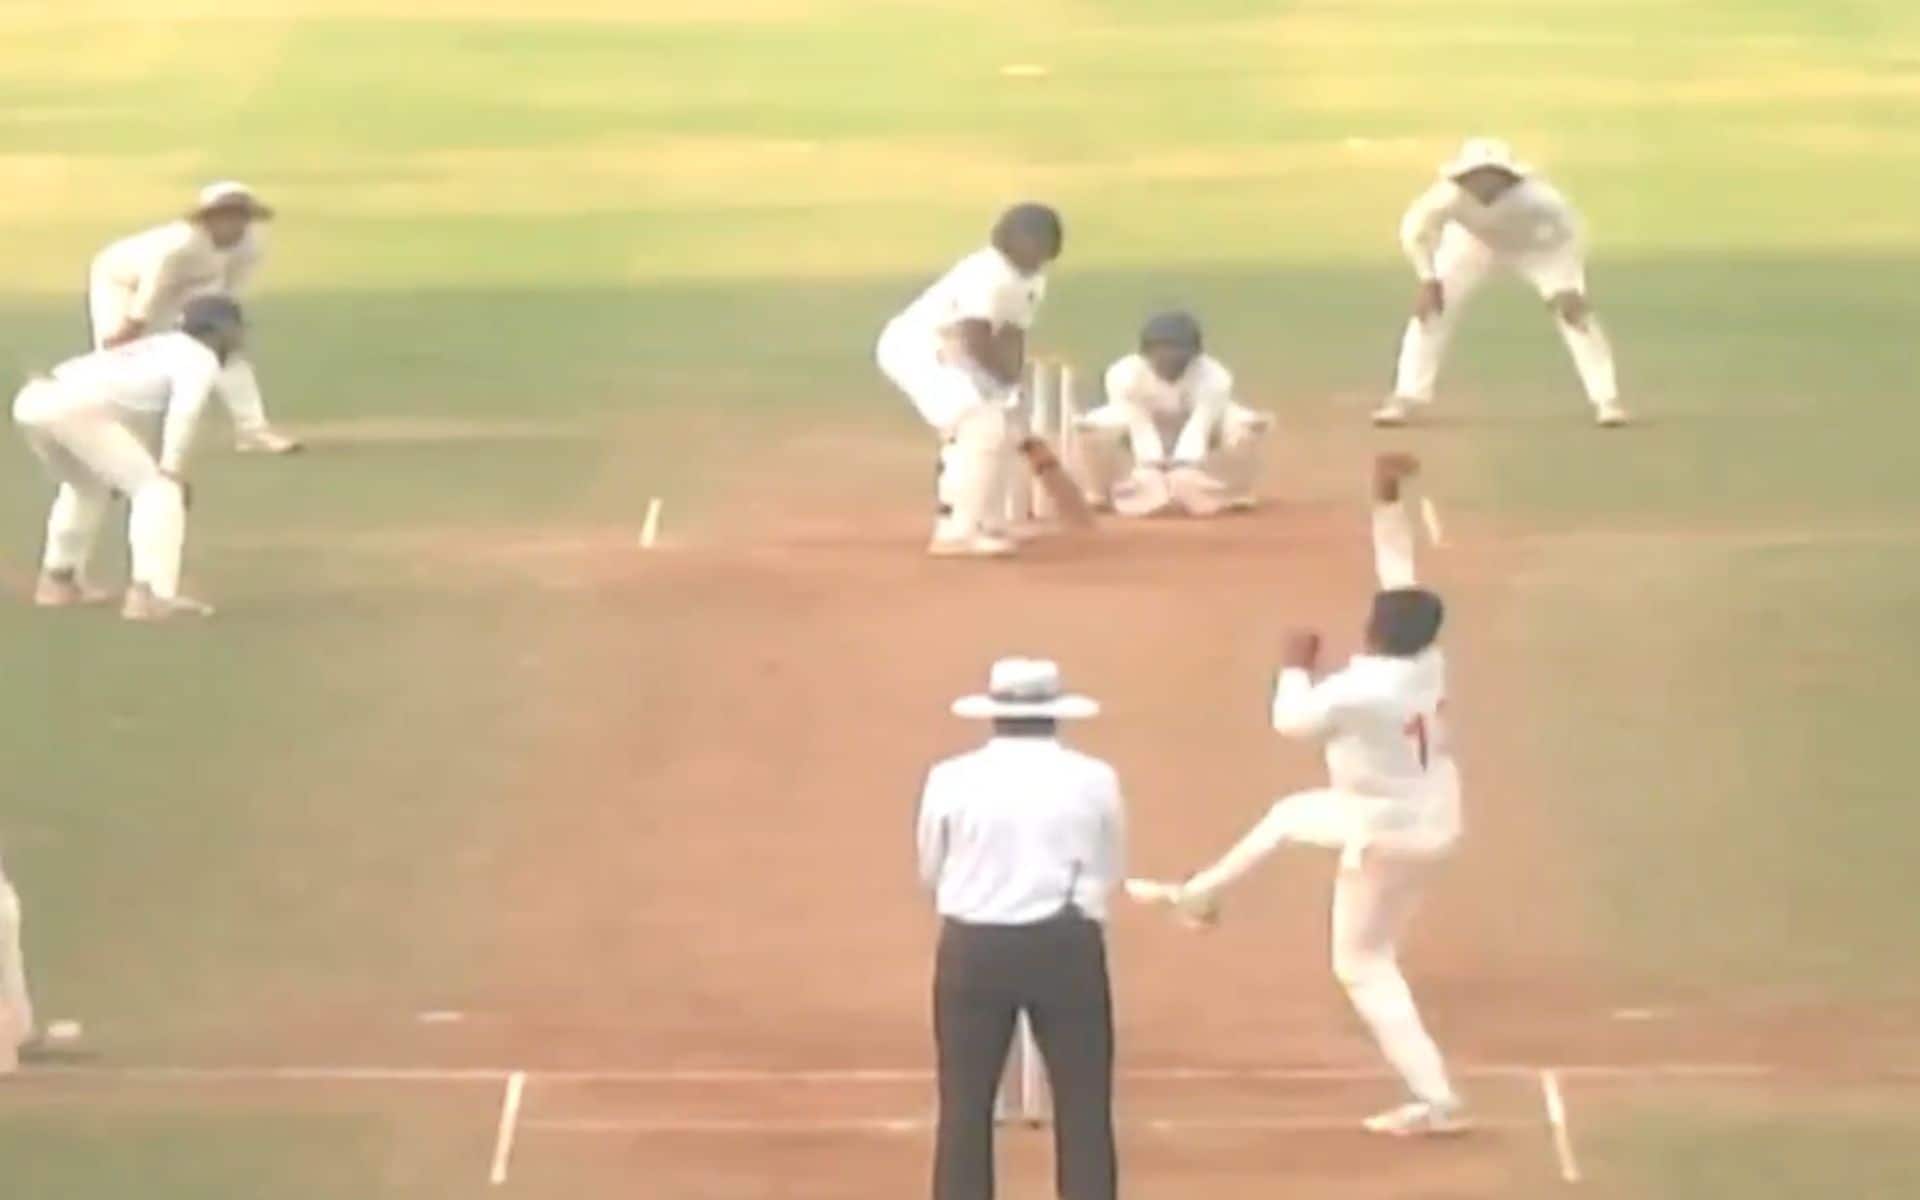 [Watch] No. 11 Tushar Deshpande's Textbook Shots In 'Historic' Century In Ranji Trophy